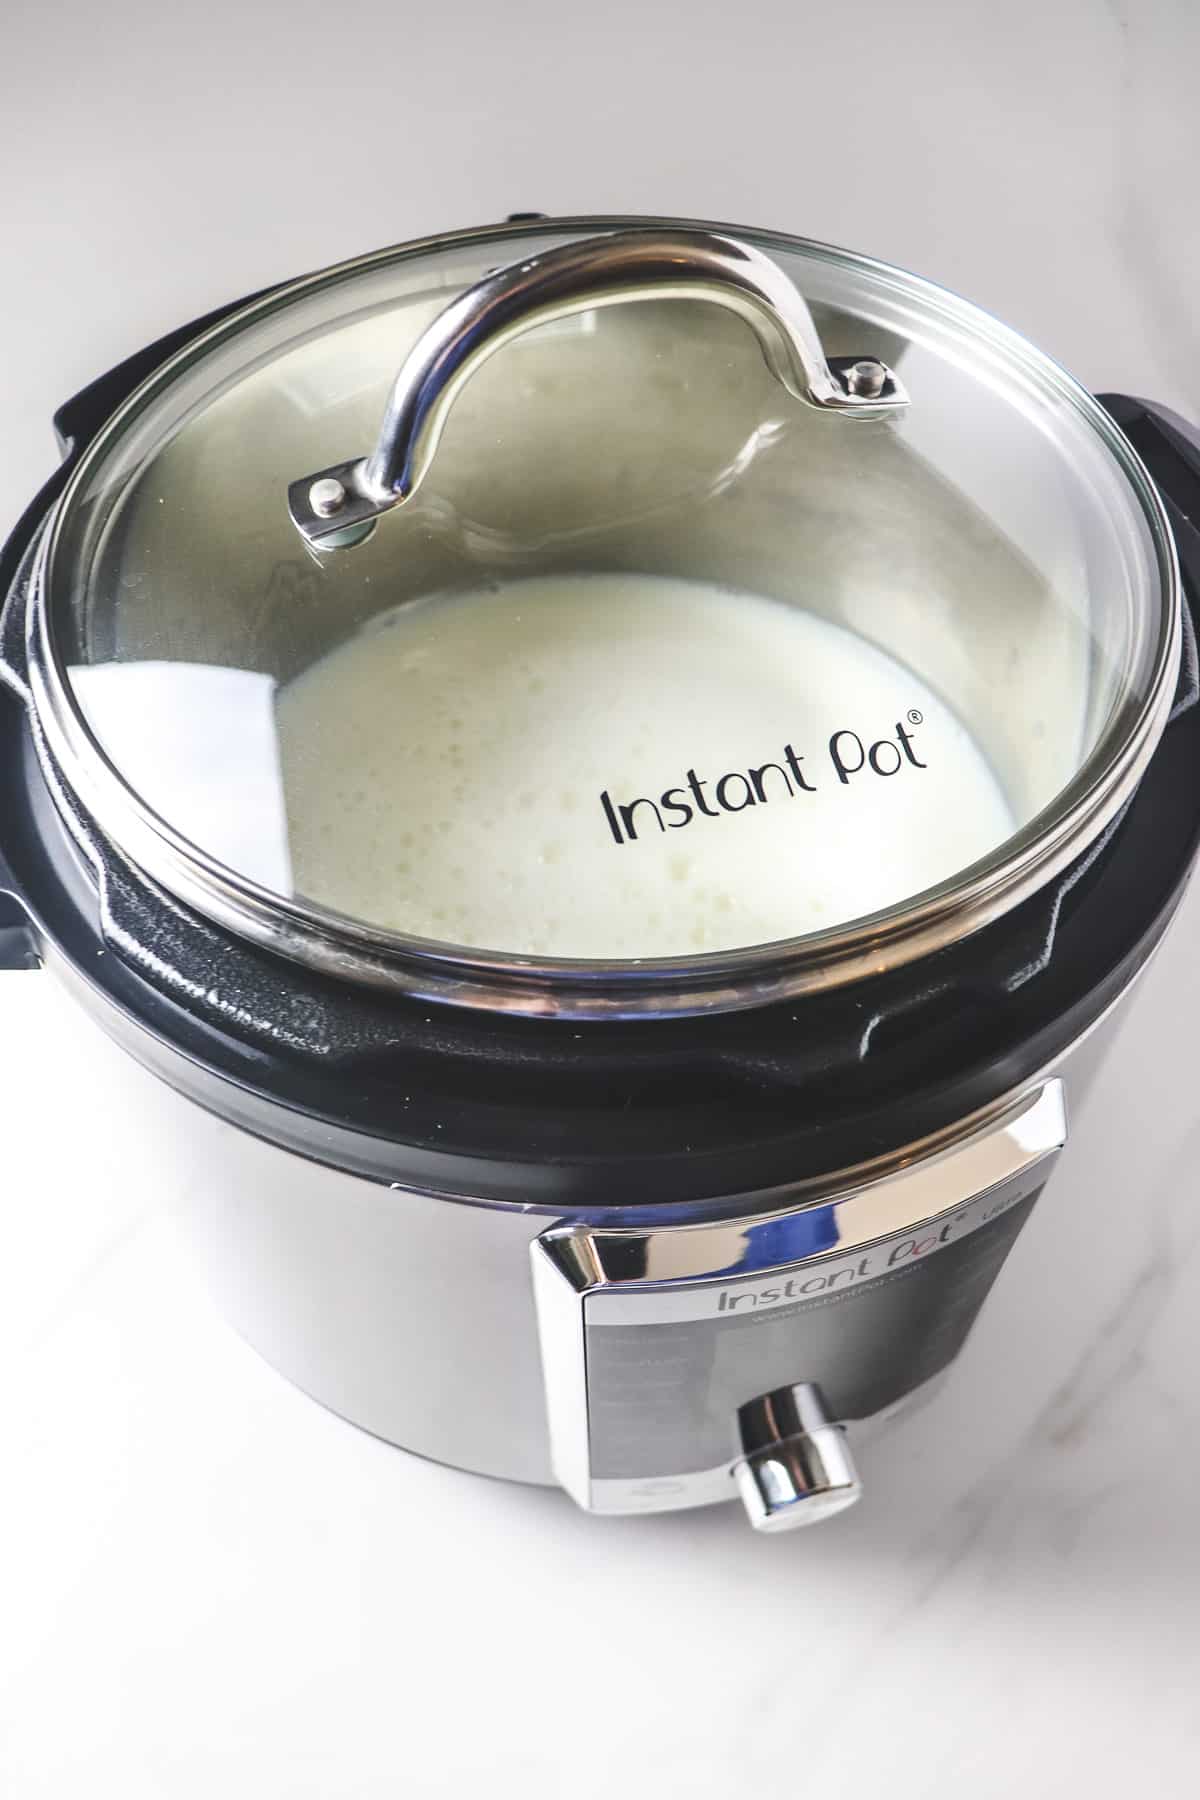 putting the glass lid on the instant pot